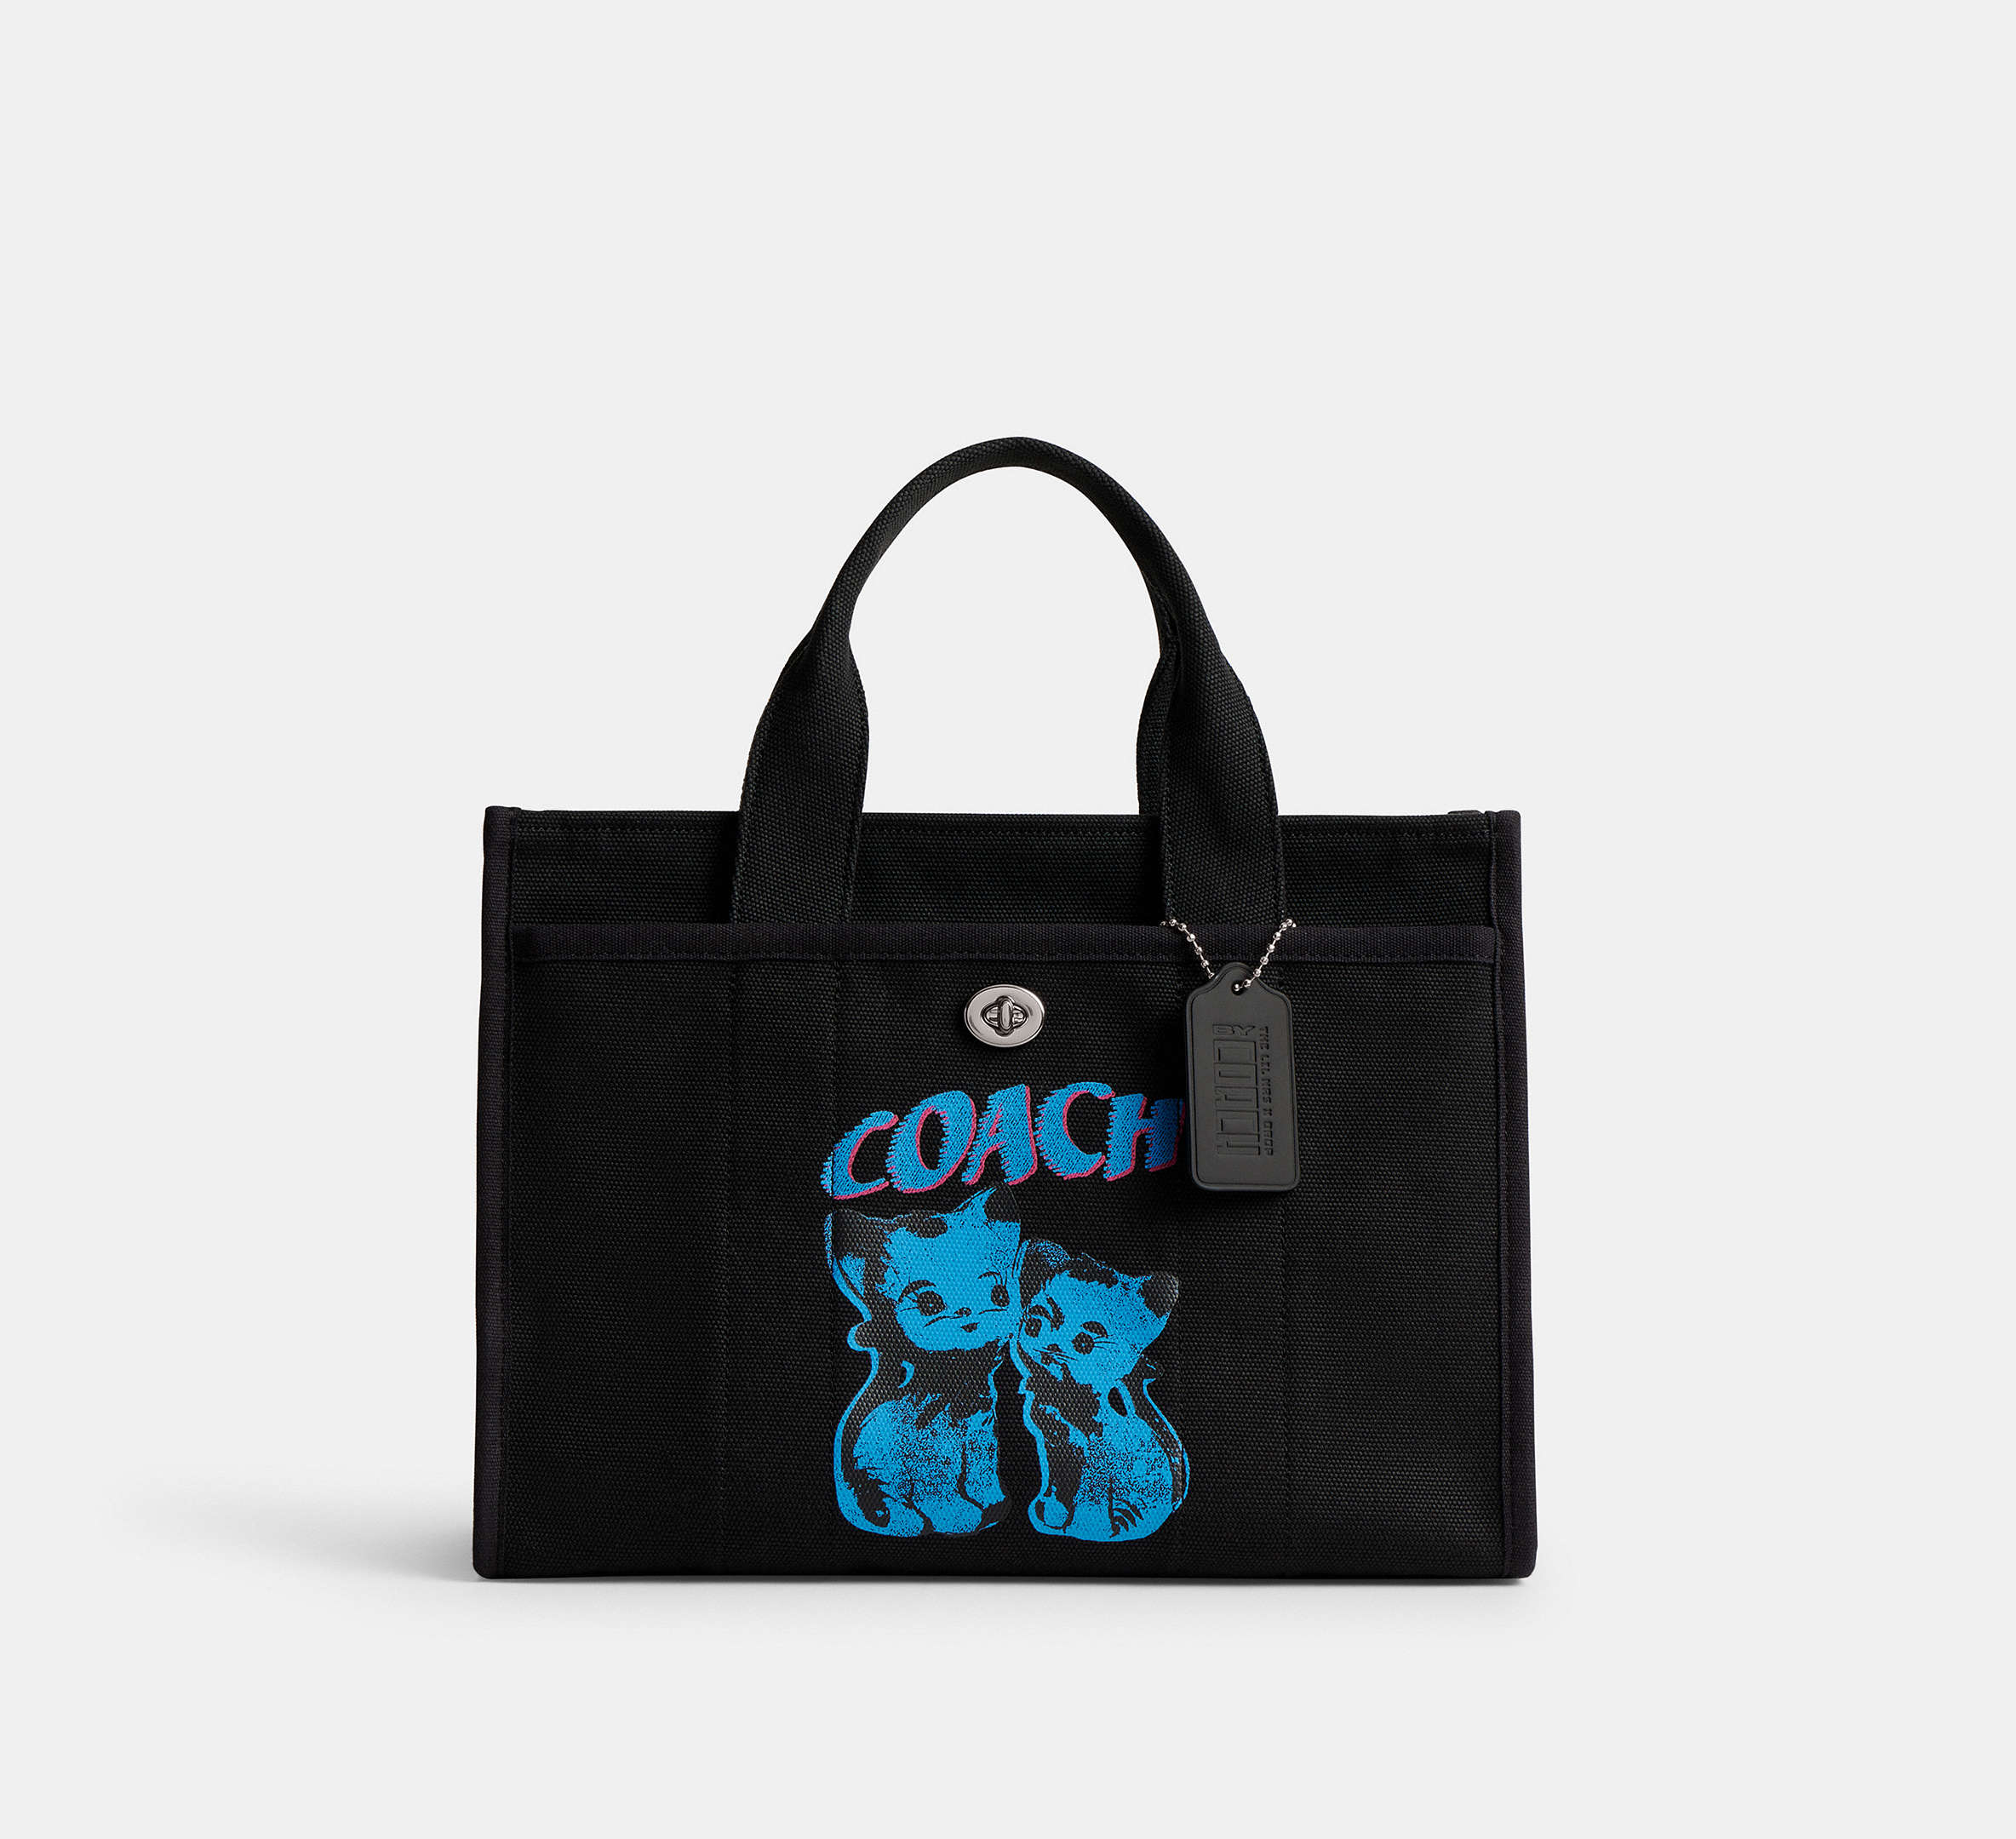 Coach Tote Cargo The Lil Nas X Drop